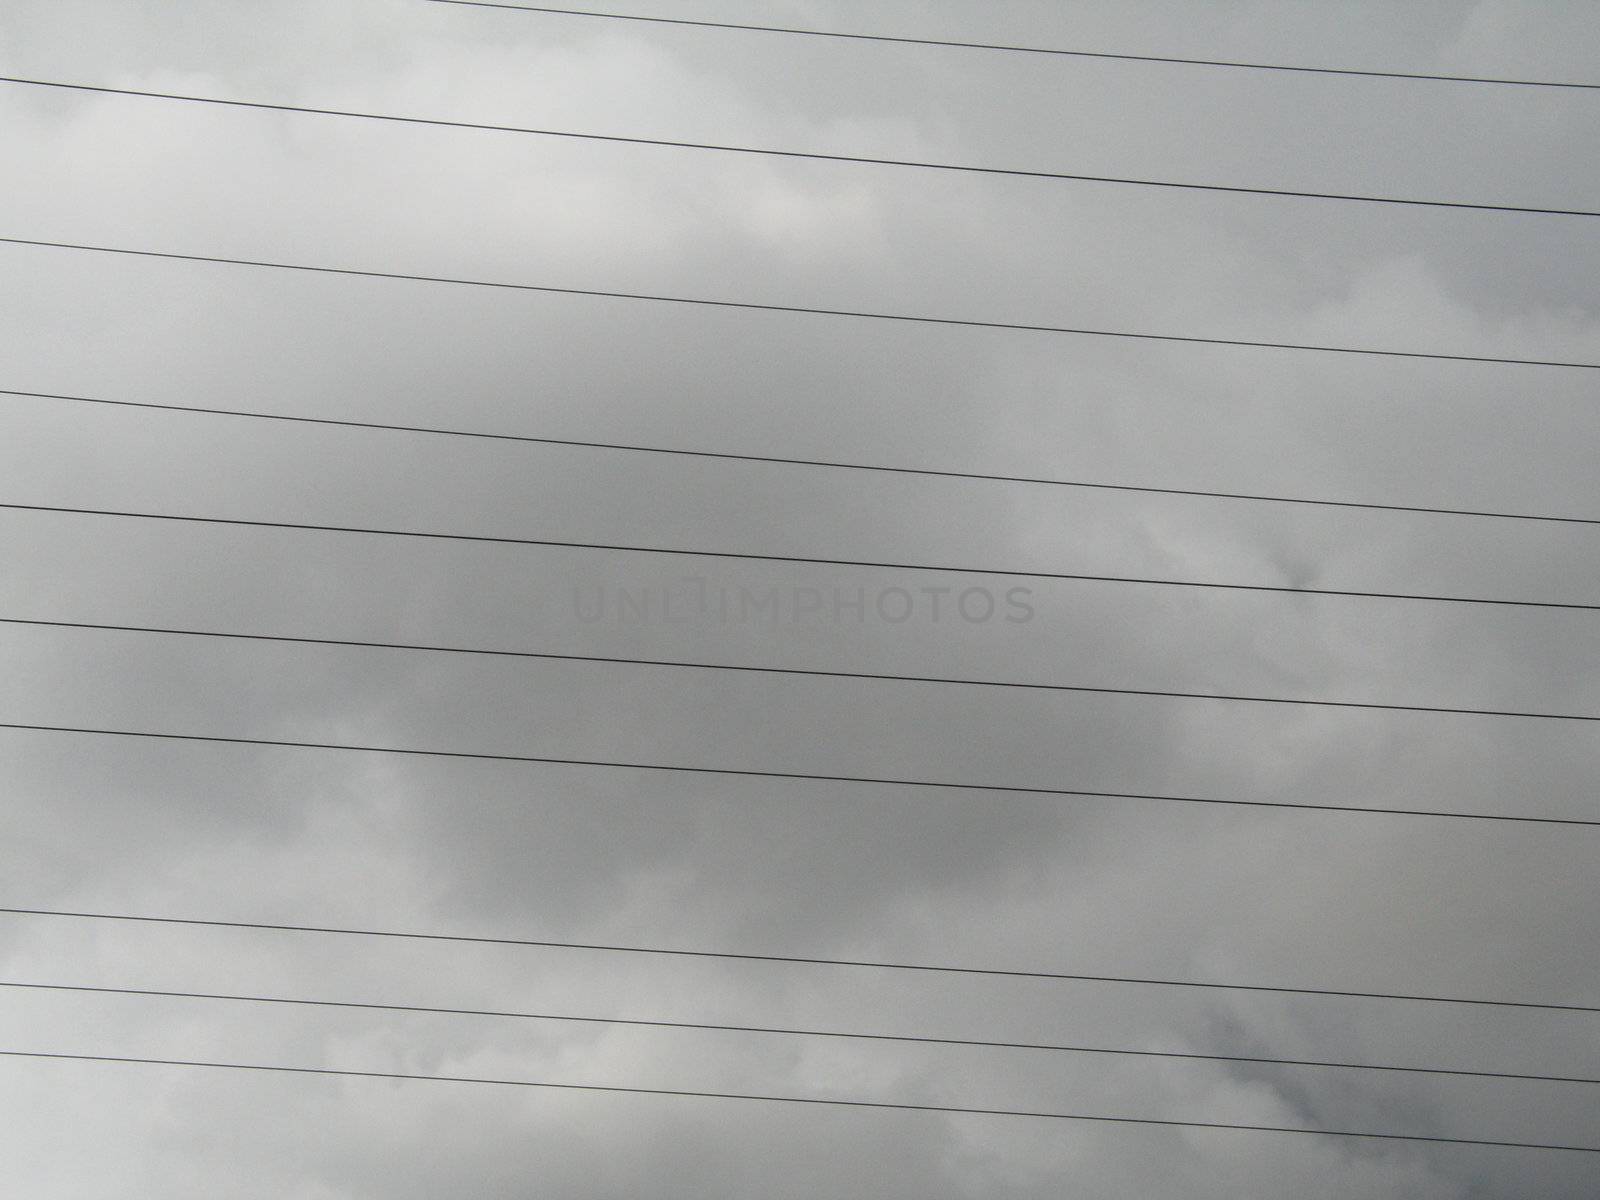 electric wires in the sky by mmm